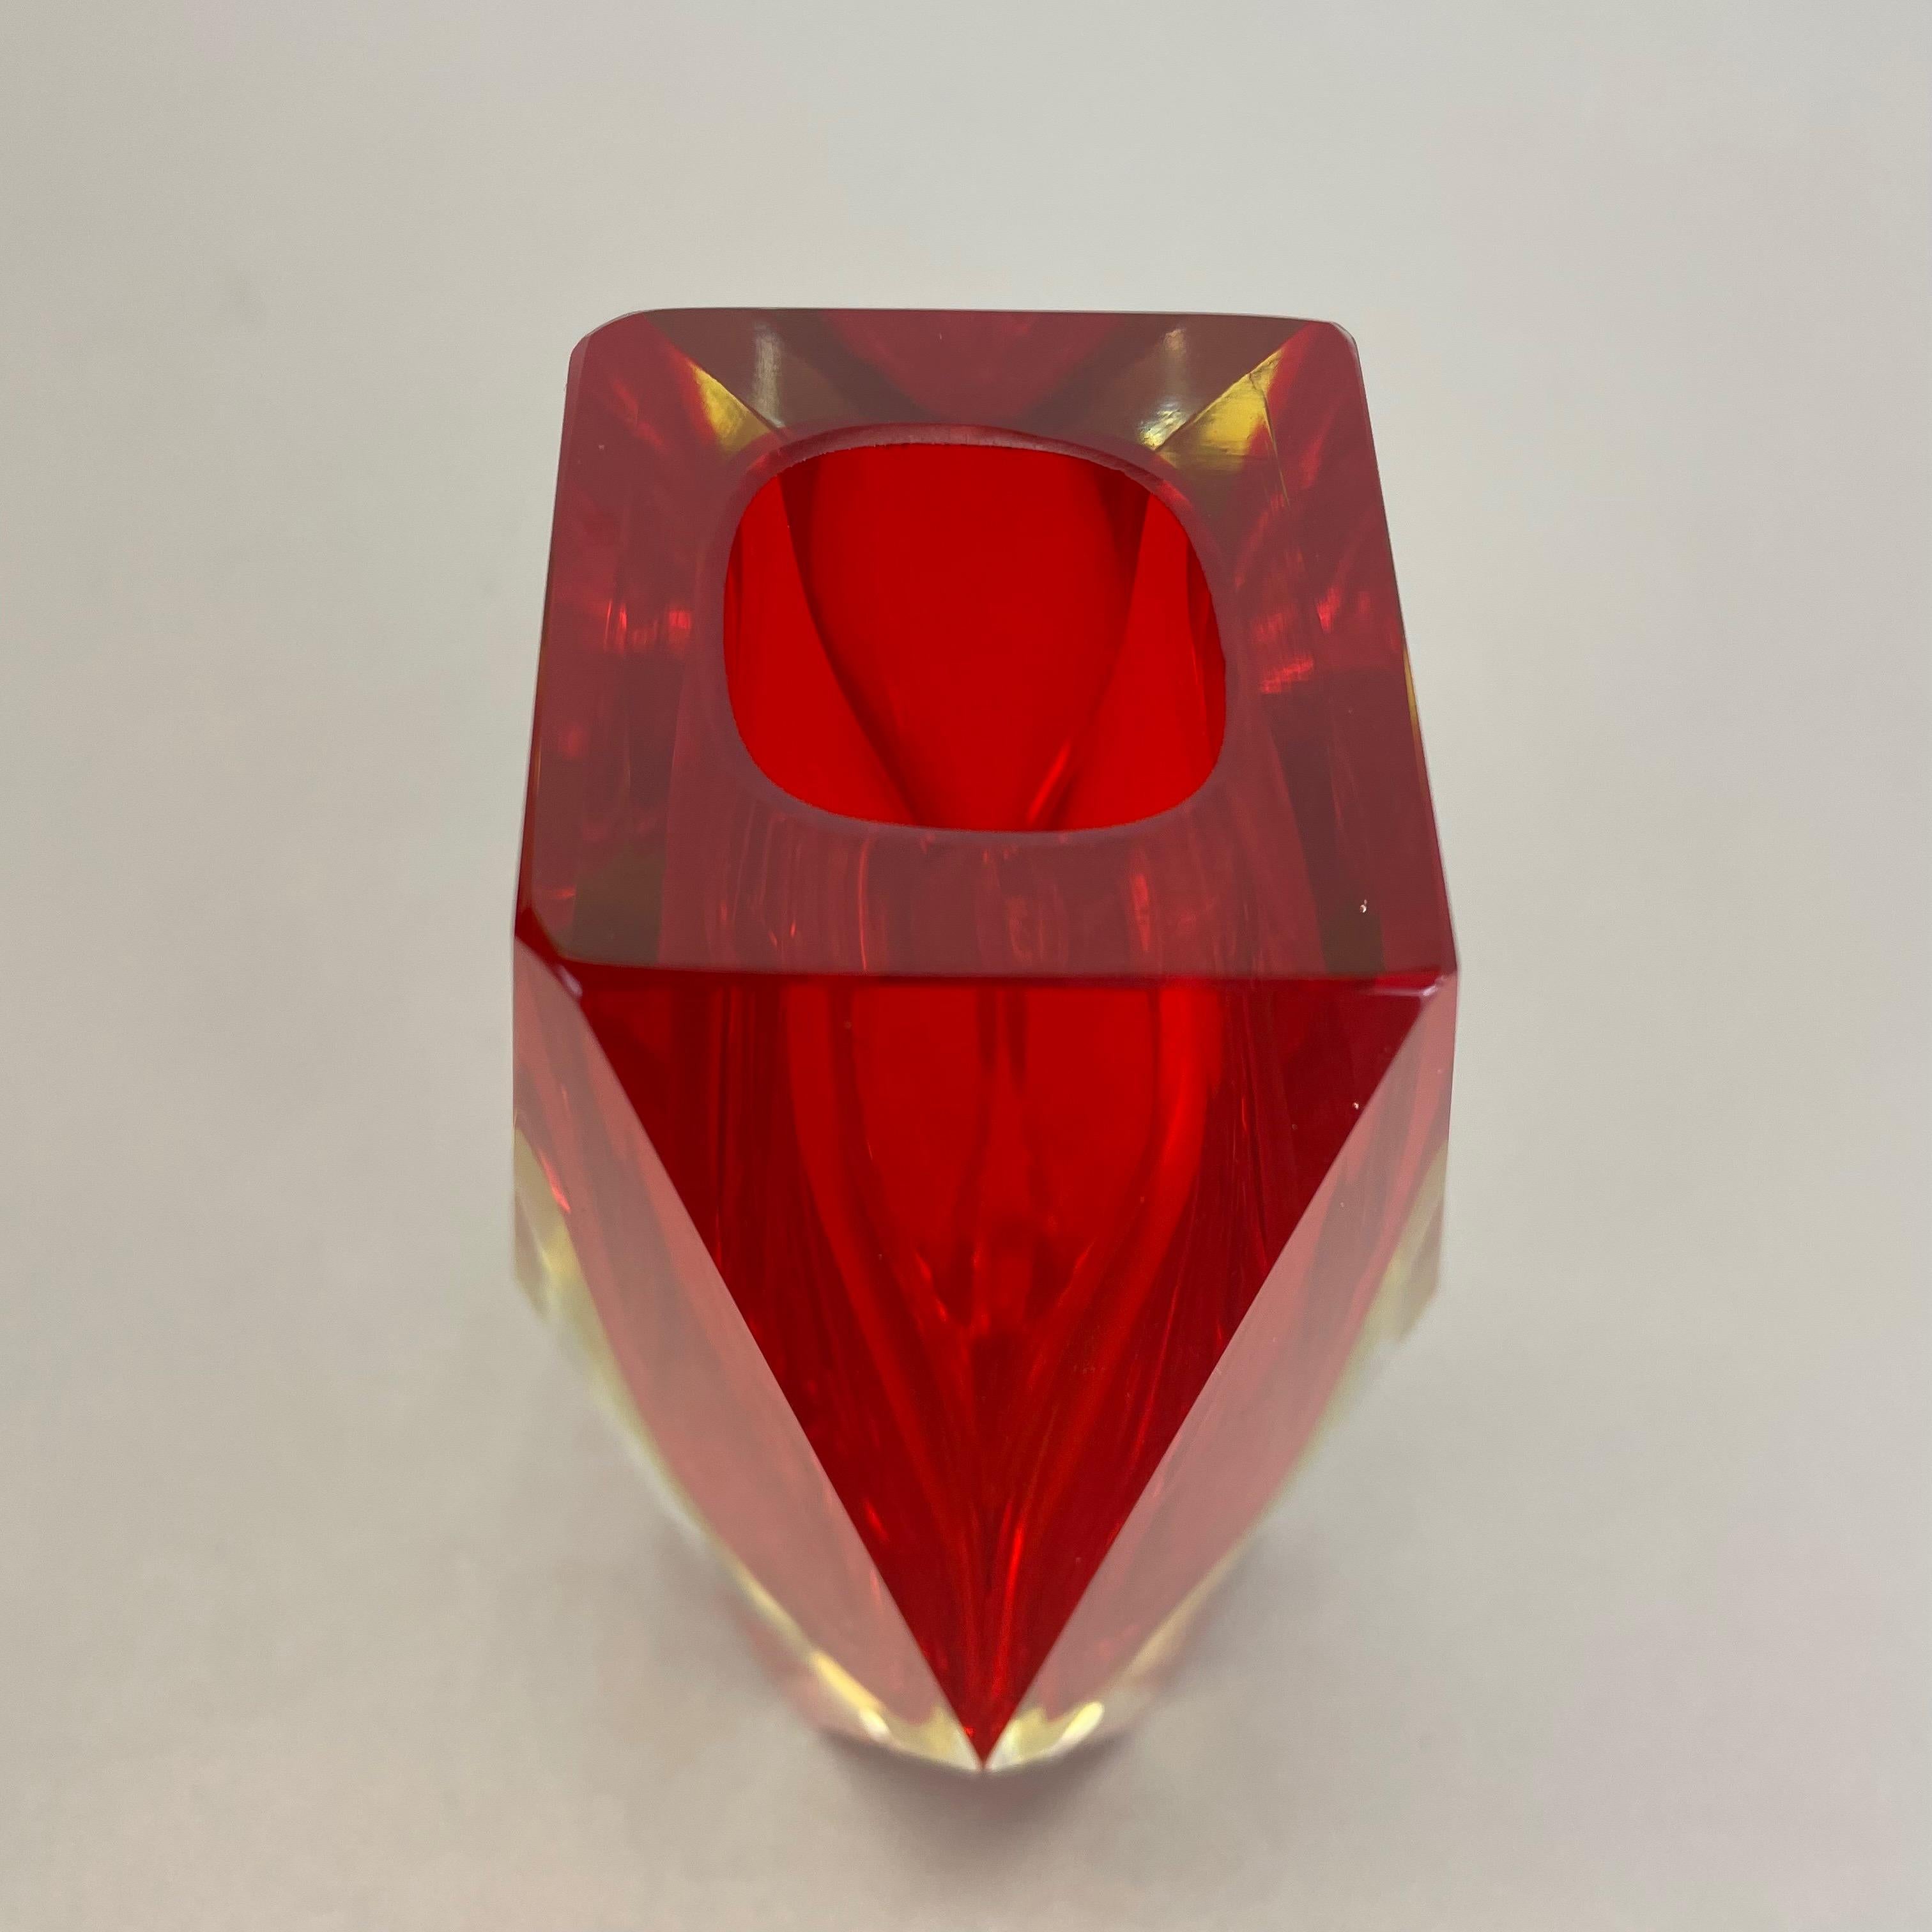 Large Red Murano Glass Sommerso Vase by Flavio Poli Attributed, Italy 1970s For Sale 3